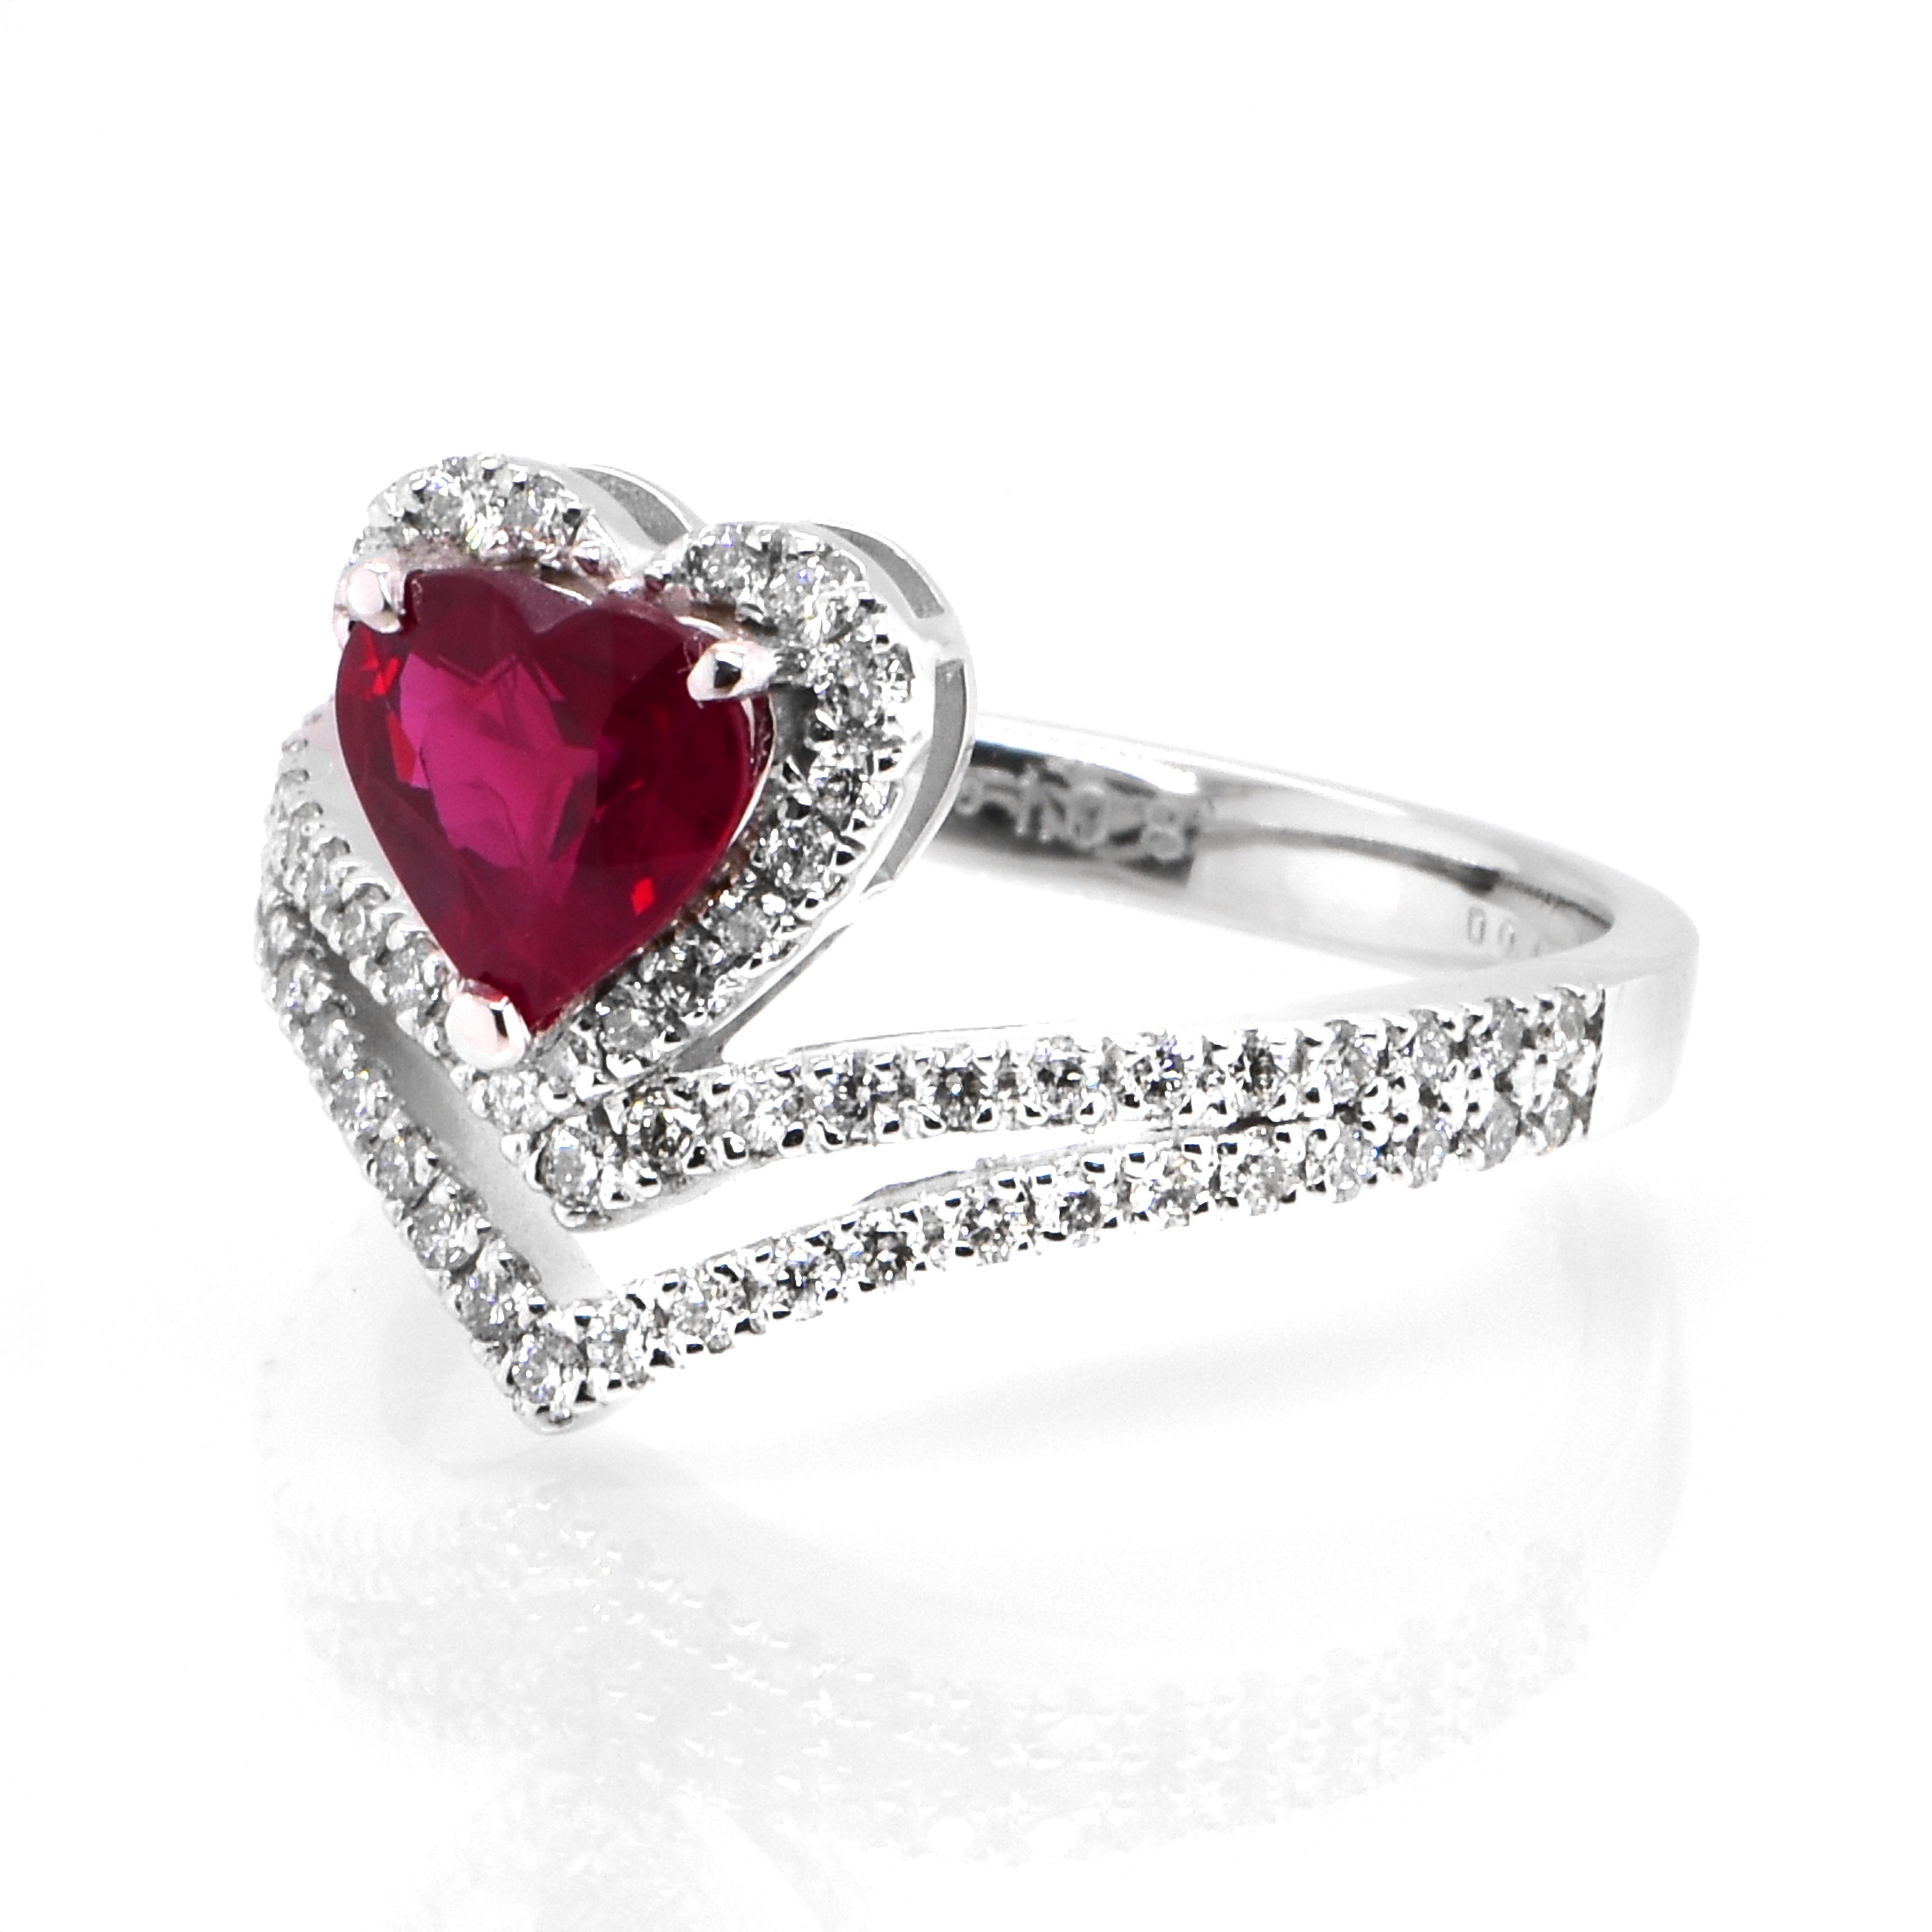 A beautiful Ring set in Platinum featuring a GIA Certified 1.08 Carat Natural, Pigeons Blood Red, Burmese Ruby and 1.16 Carat Diamonds. Rubies are referred to as 